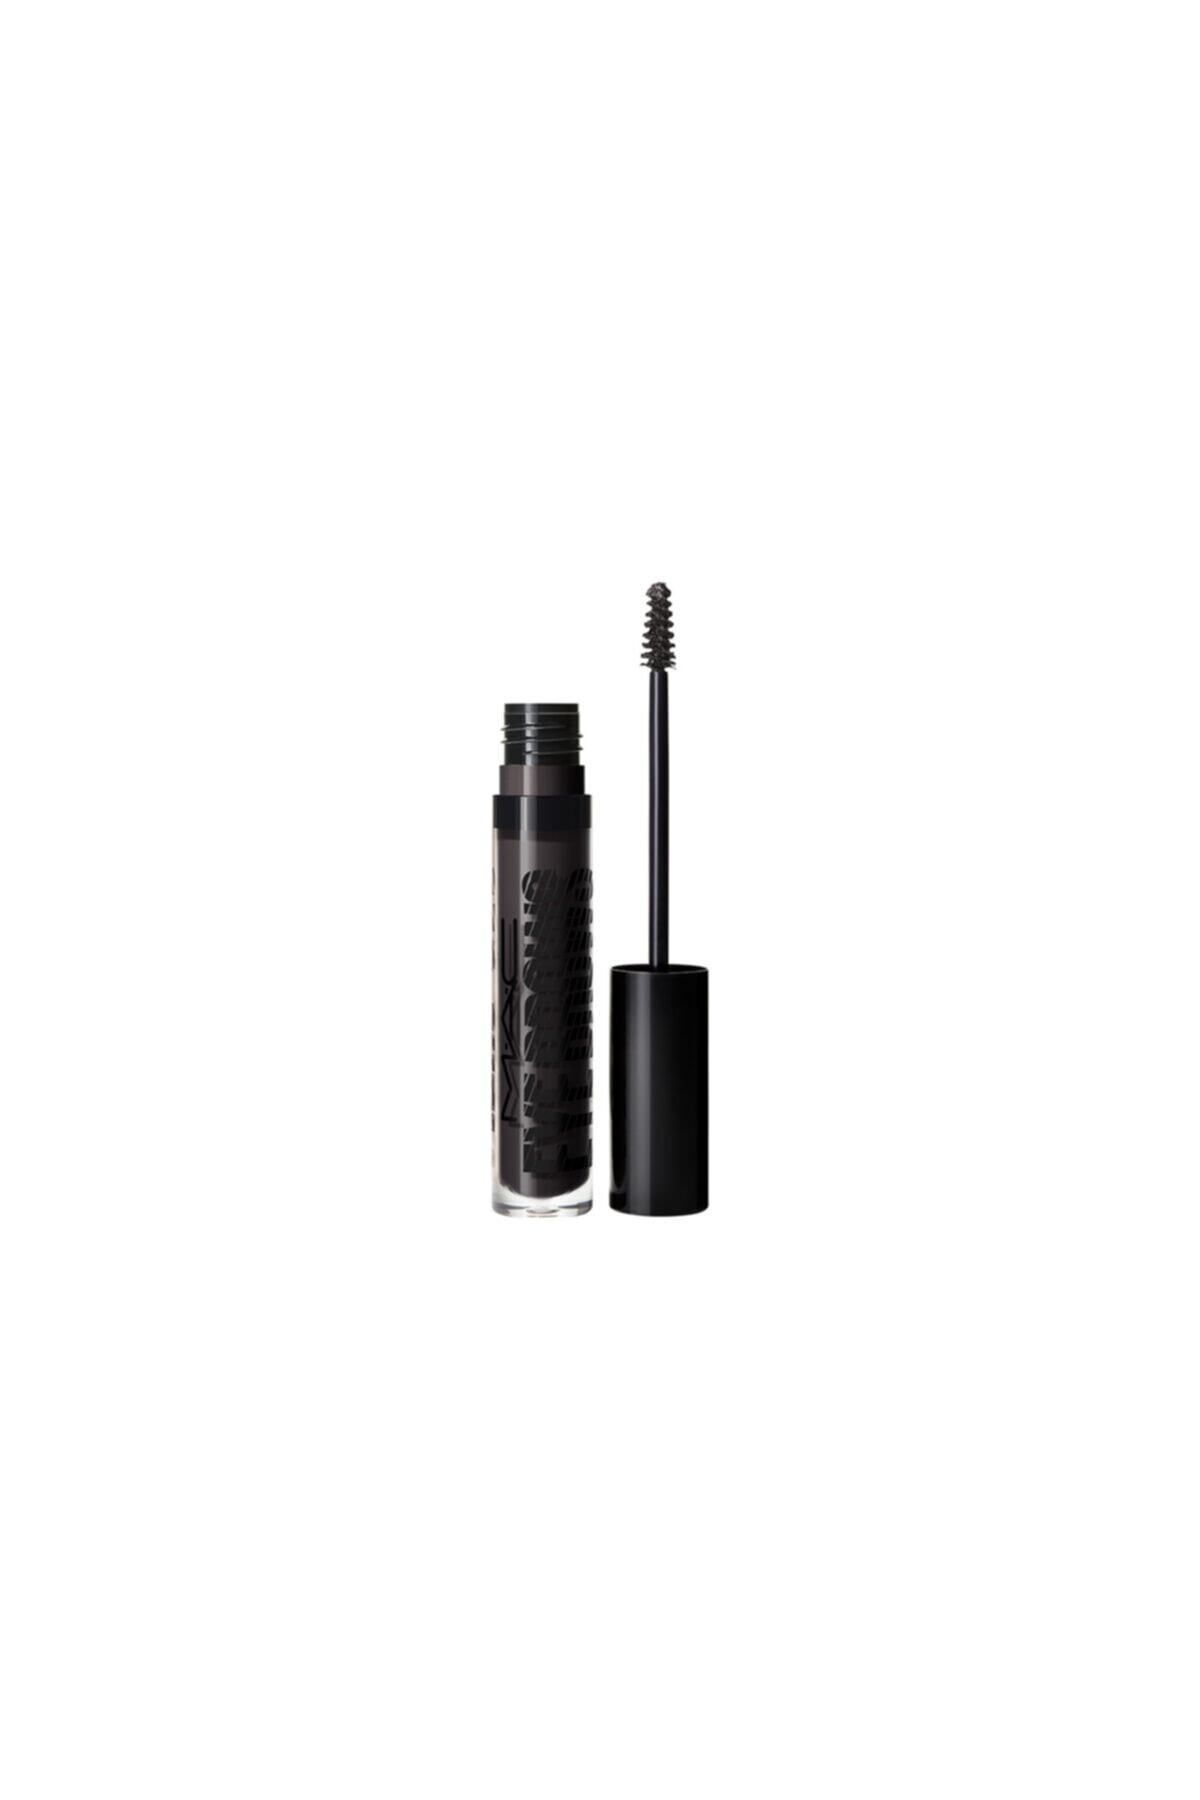 Mac Gel Eyebrow Mascara that Gives an Intense and Defined Look